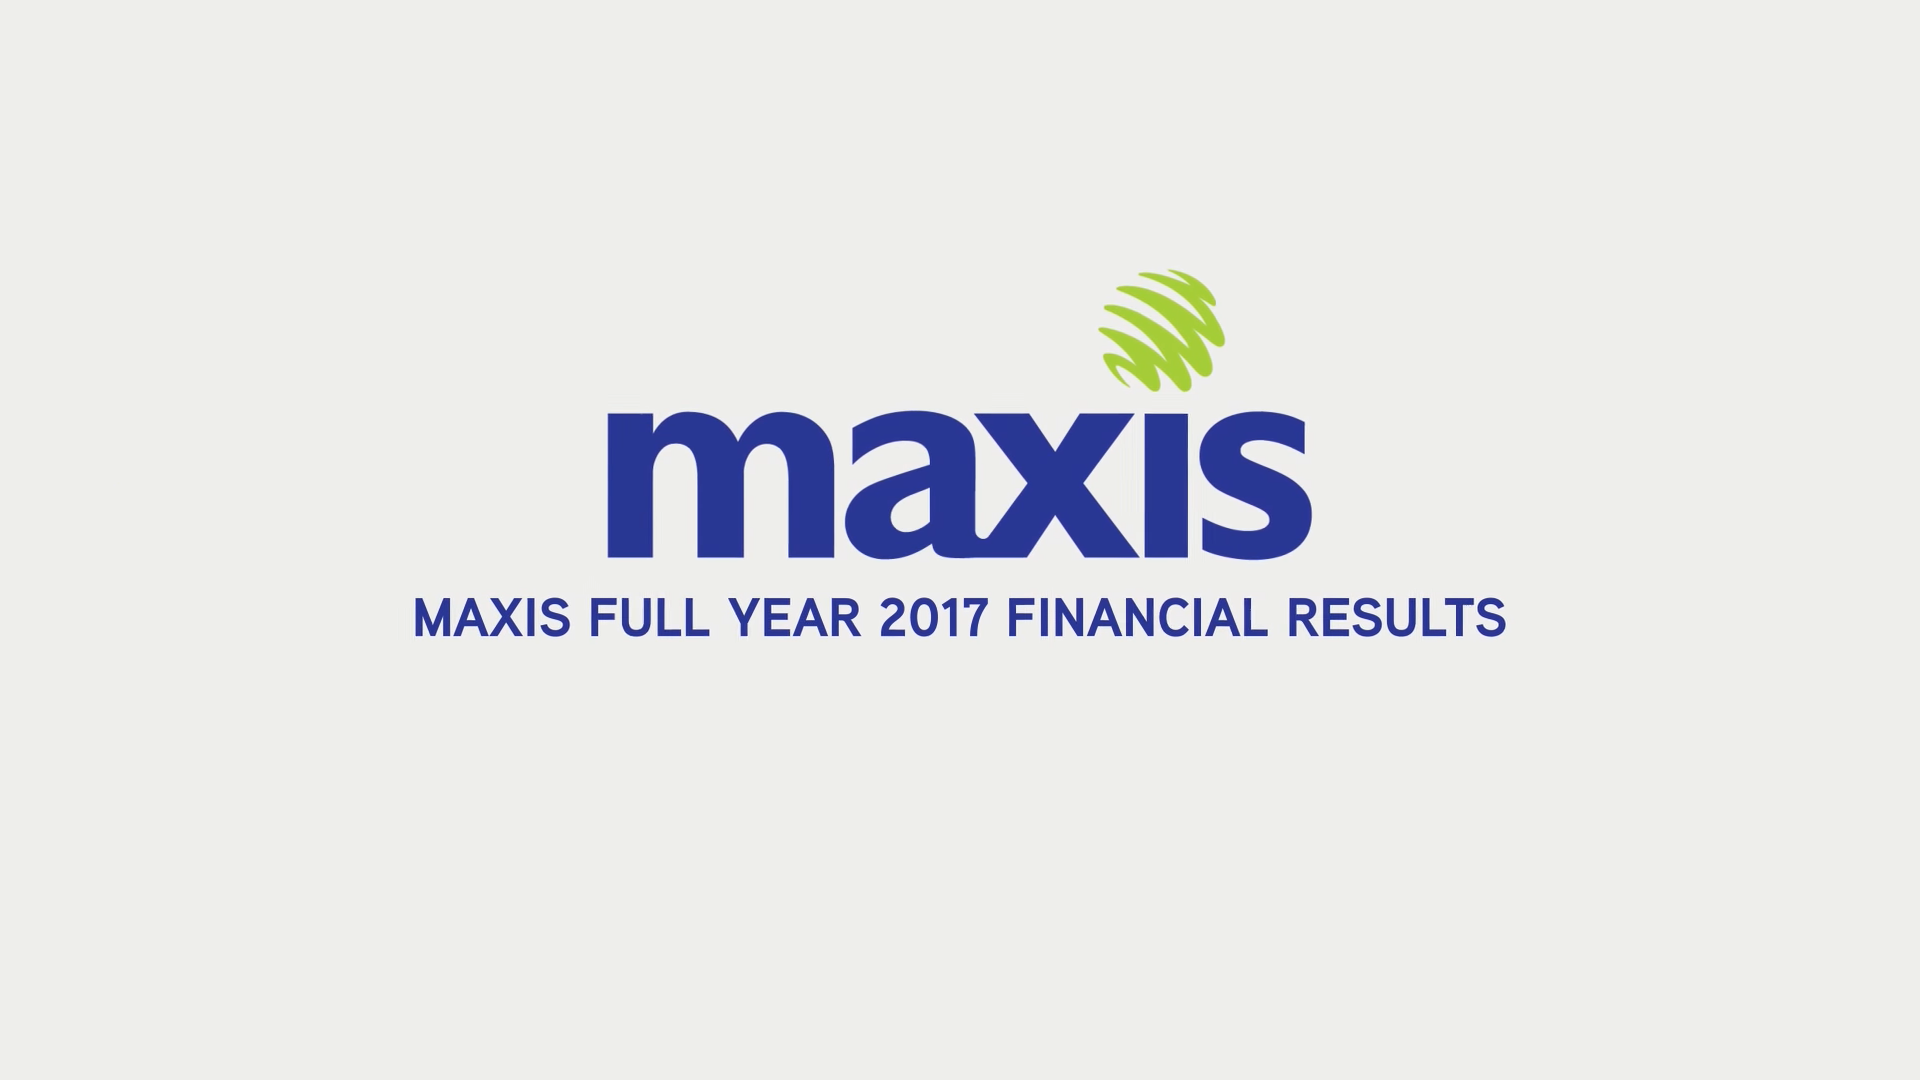 Maxis releases 2017 full year financial results, an increase of 2.1% Year-to-Year reaching RM4,597 million